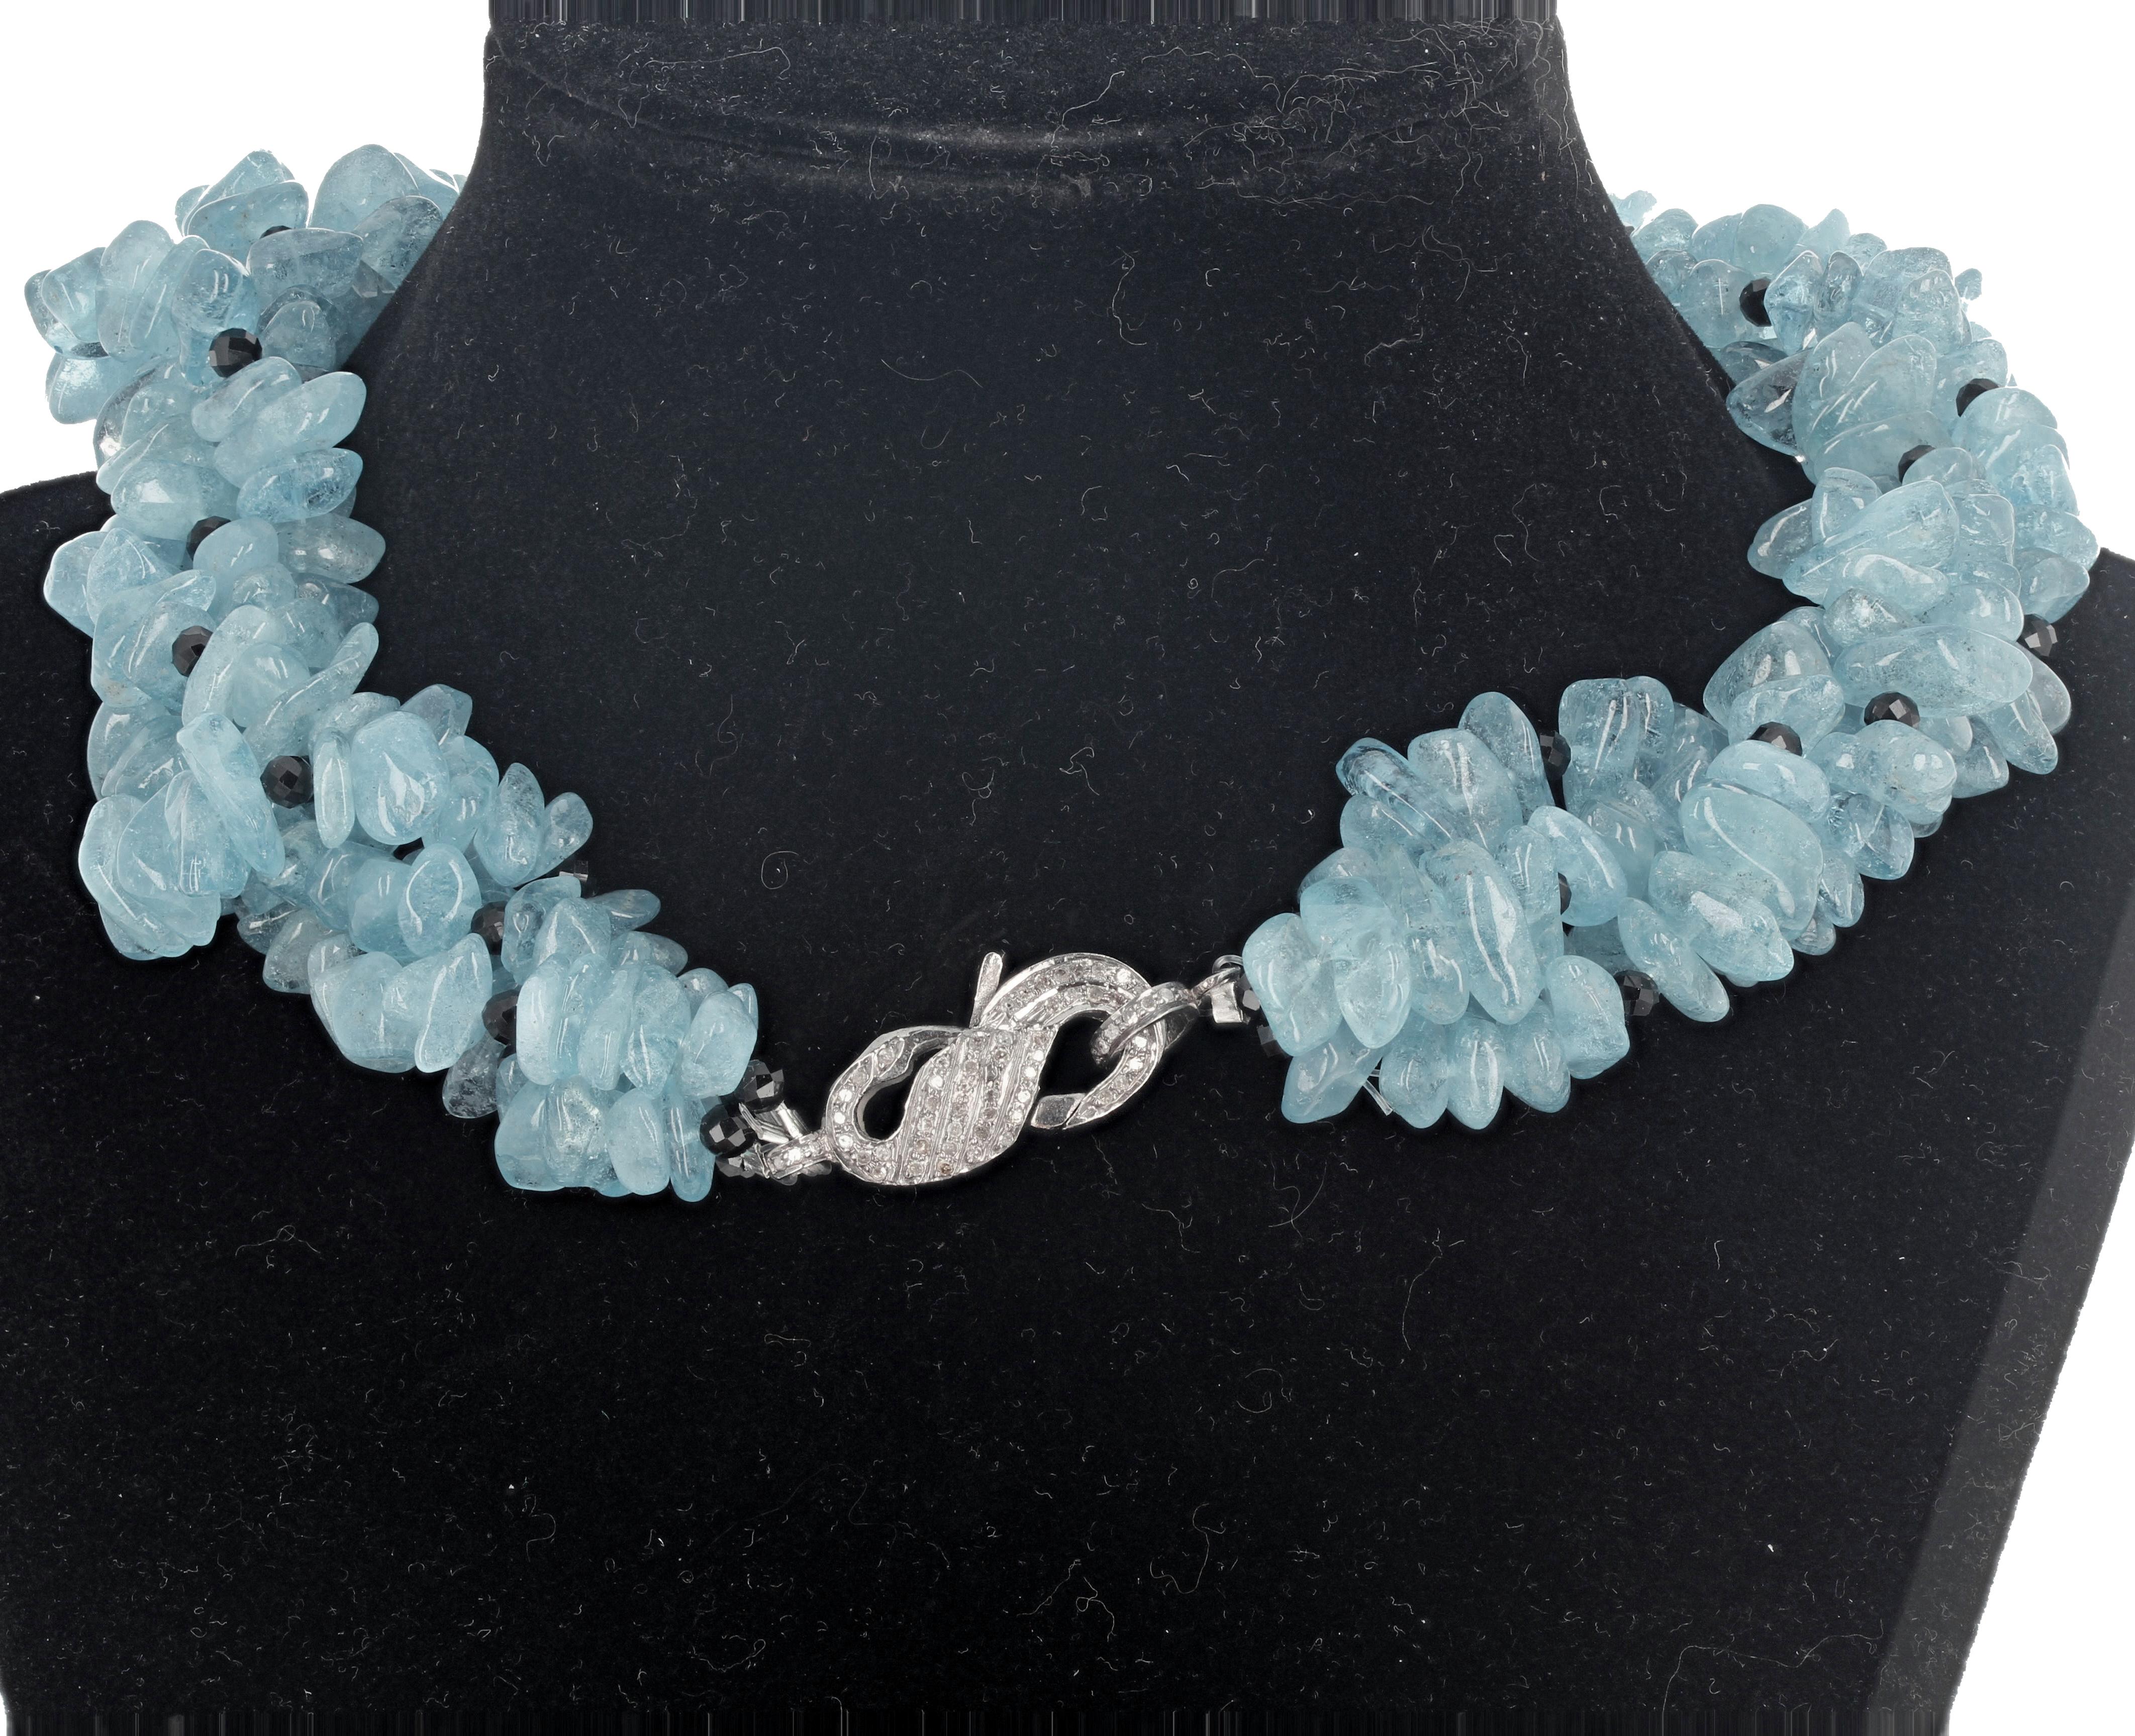 This beautiful multi-strand (4 strands) natural chunkychips of highly polished Aquamarines can sit different ways around your neck.  It is 16 inches long with a diamond encrusted darkened sterling silver lever (easy to work) clasp.  You can flip it